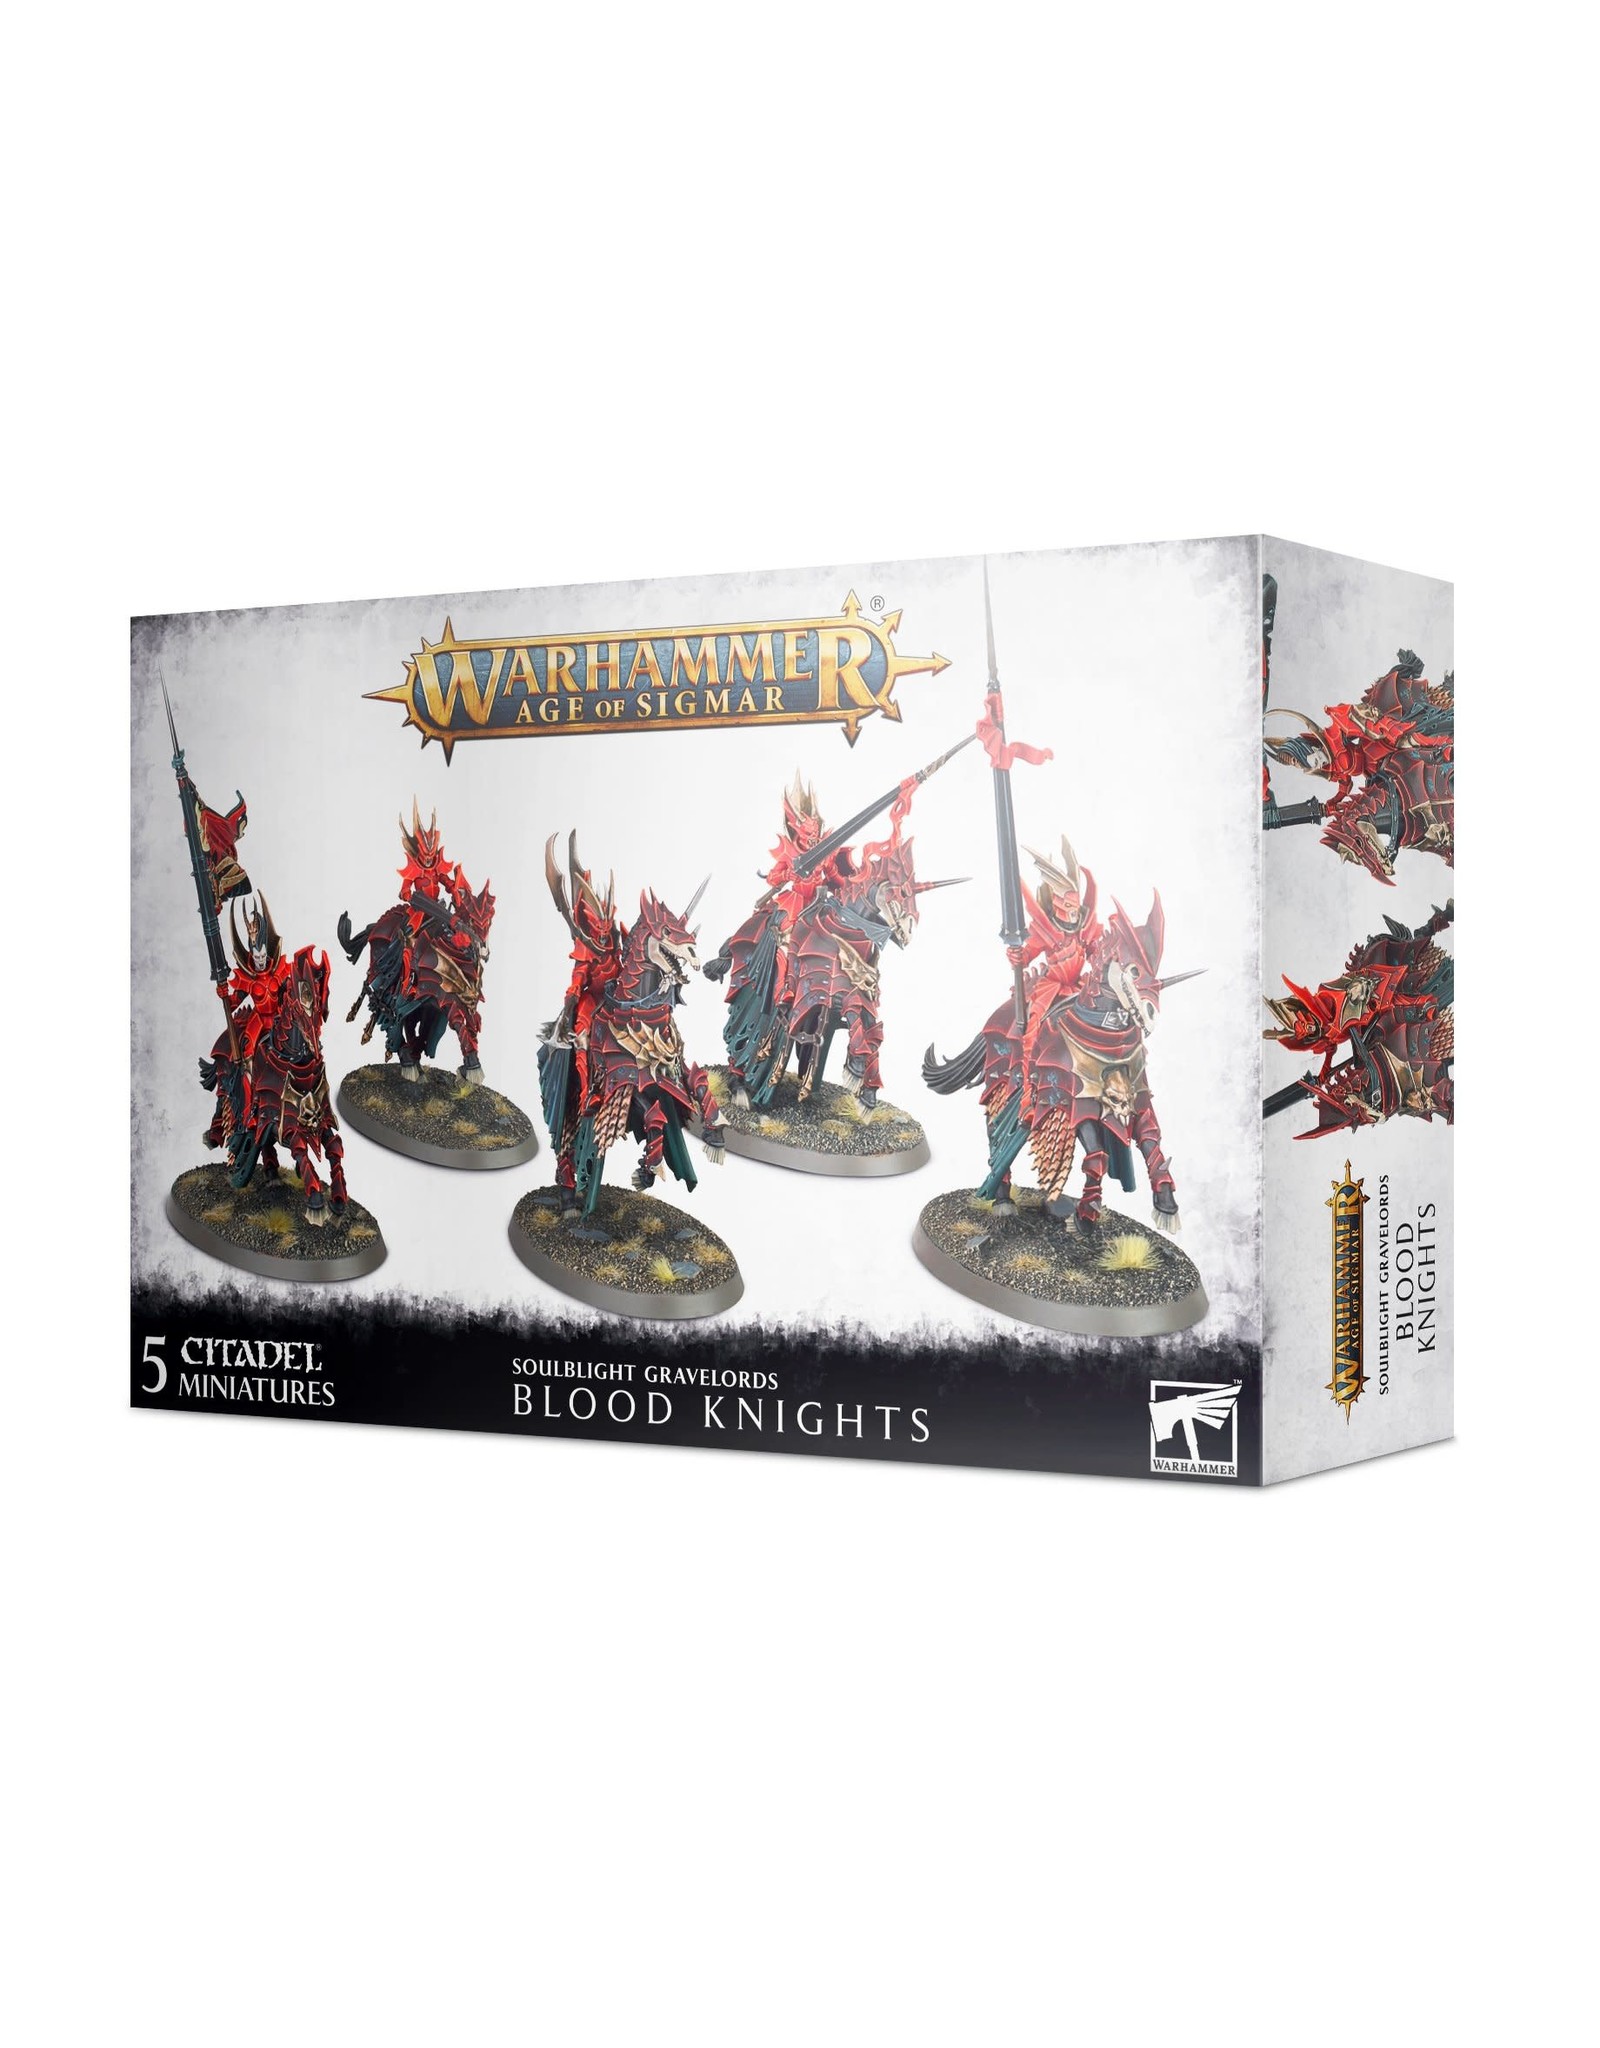 Warhammer Age of Sigmar Soulblight Gravelords: Blood Knights